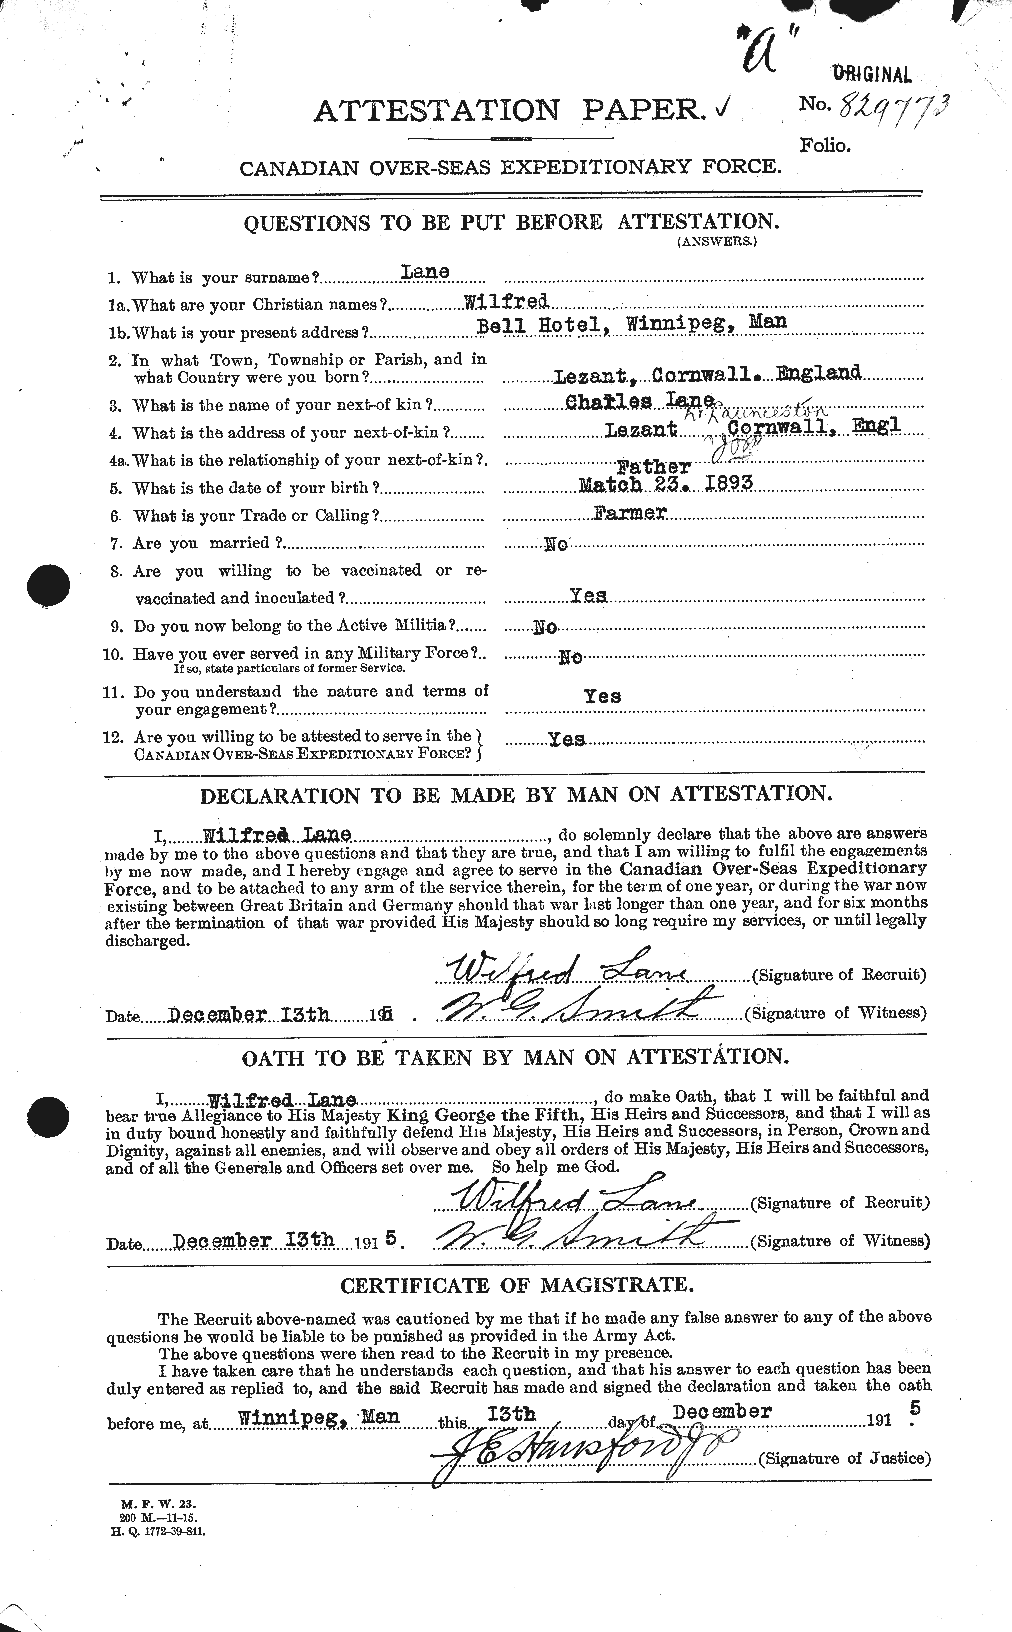 Personnel Records of the First World War - CEF 446202a